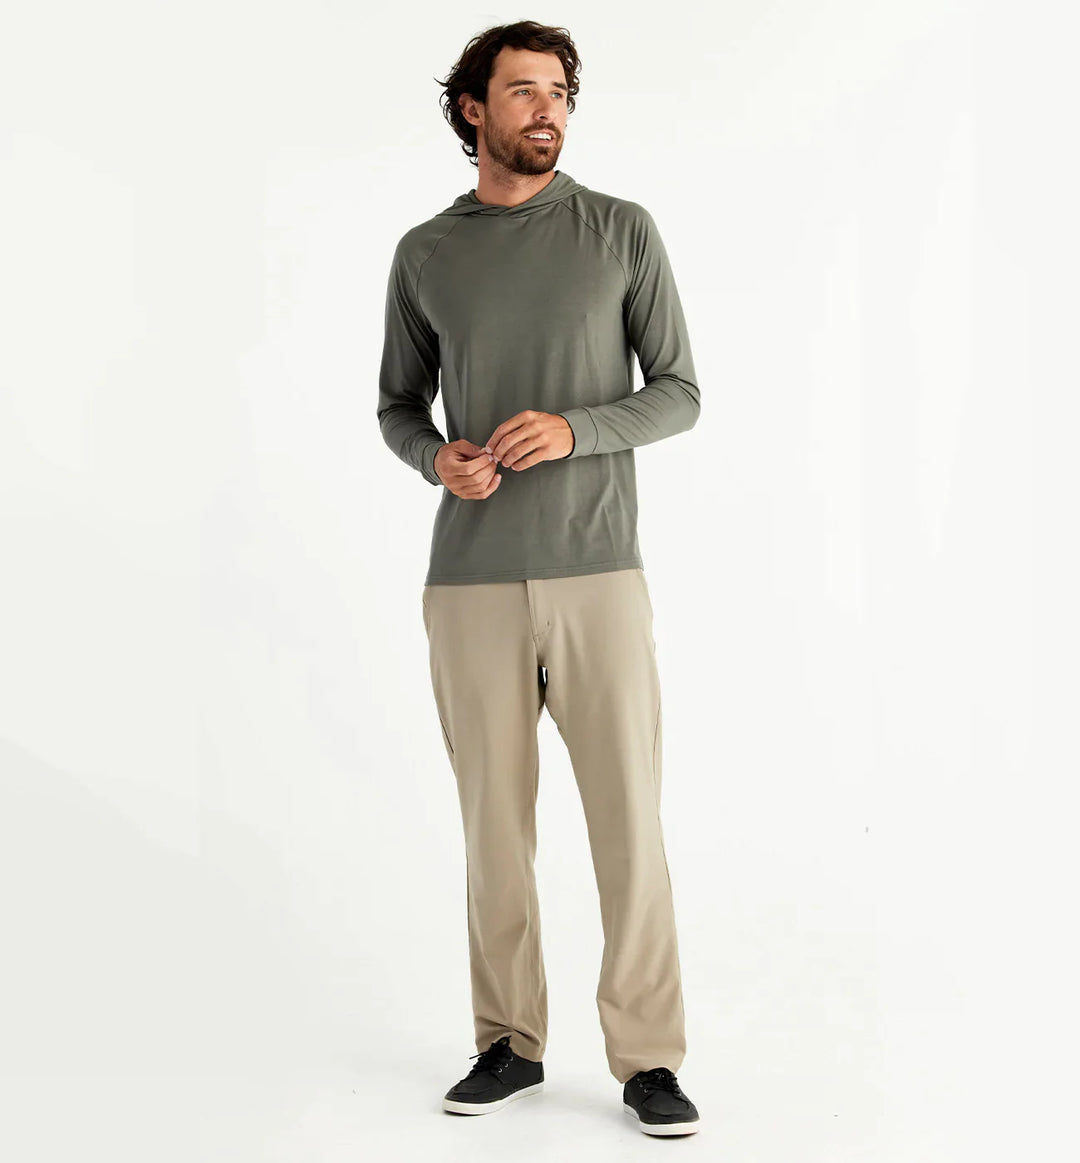 Free Fly Men's Bamboo Flex Hoodie in Fatigue